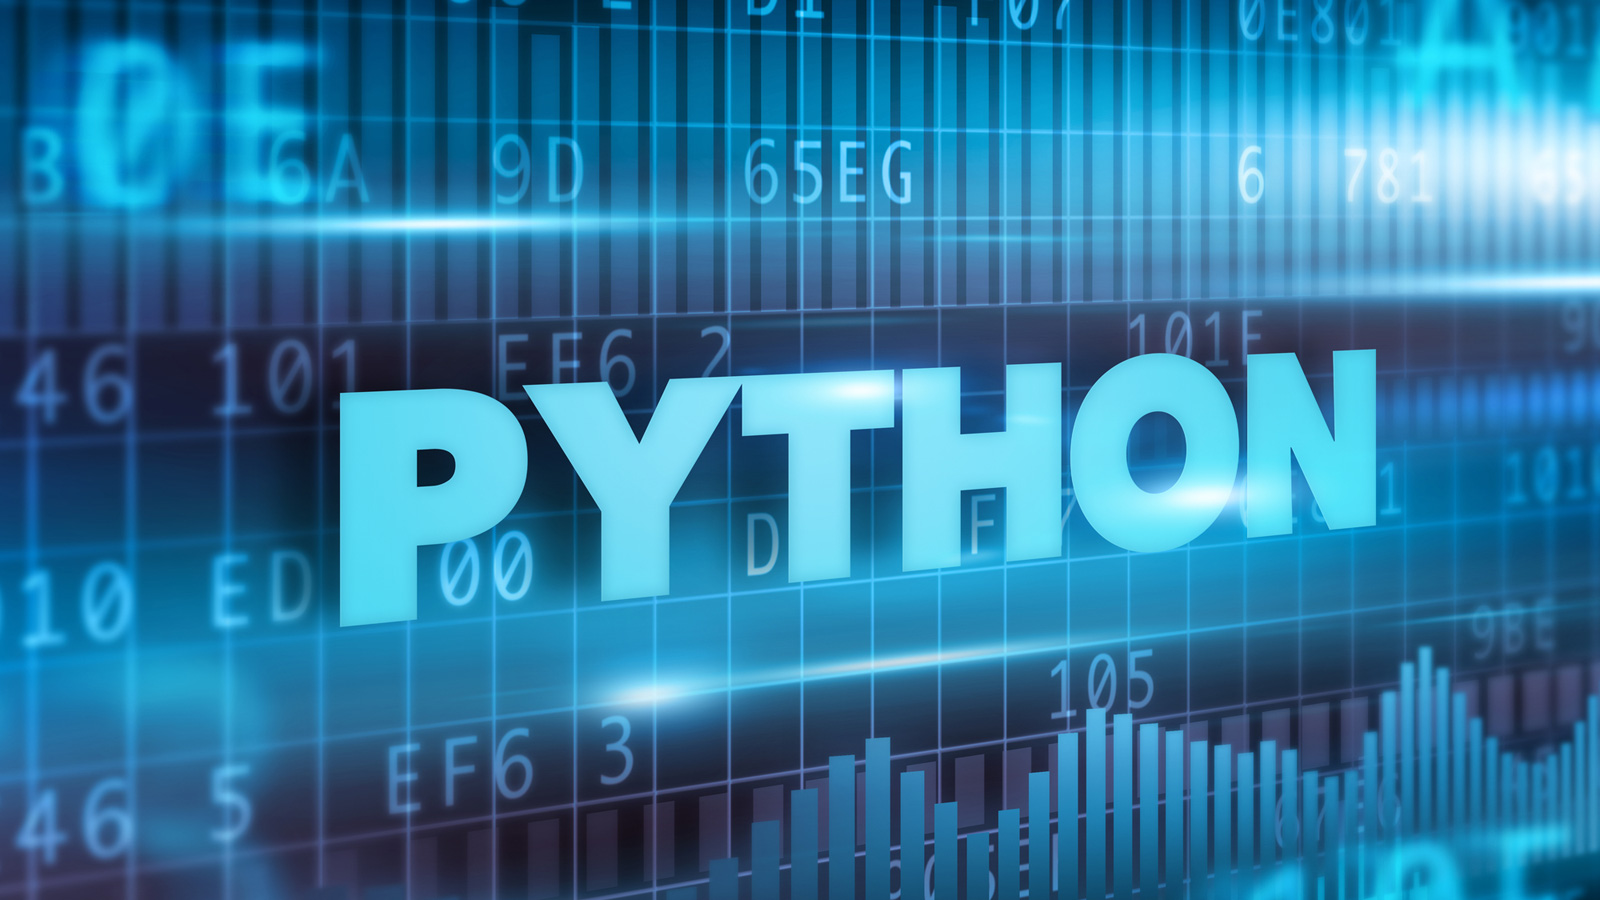 A vulnerability in the Python programming language that has been overlooked for 15 years is now back in the spotlight as it likely affects more than 3